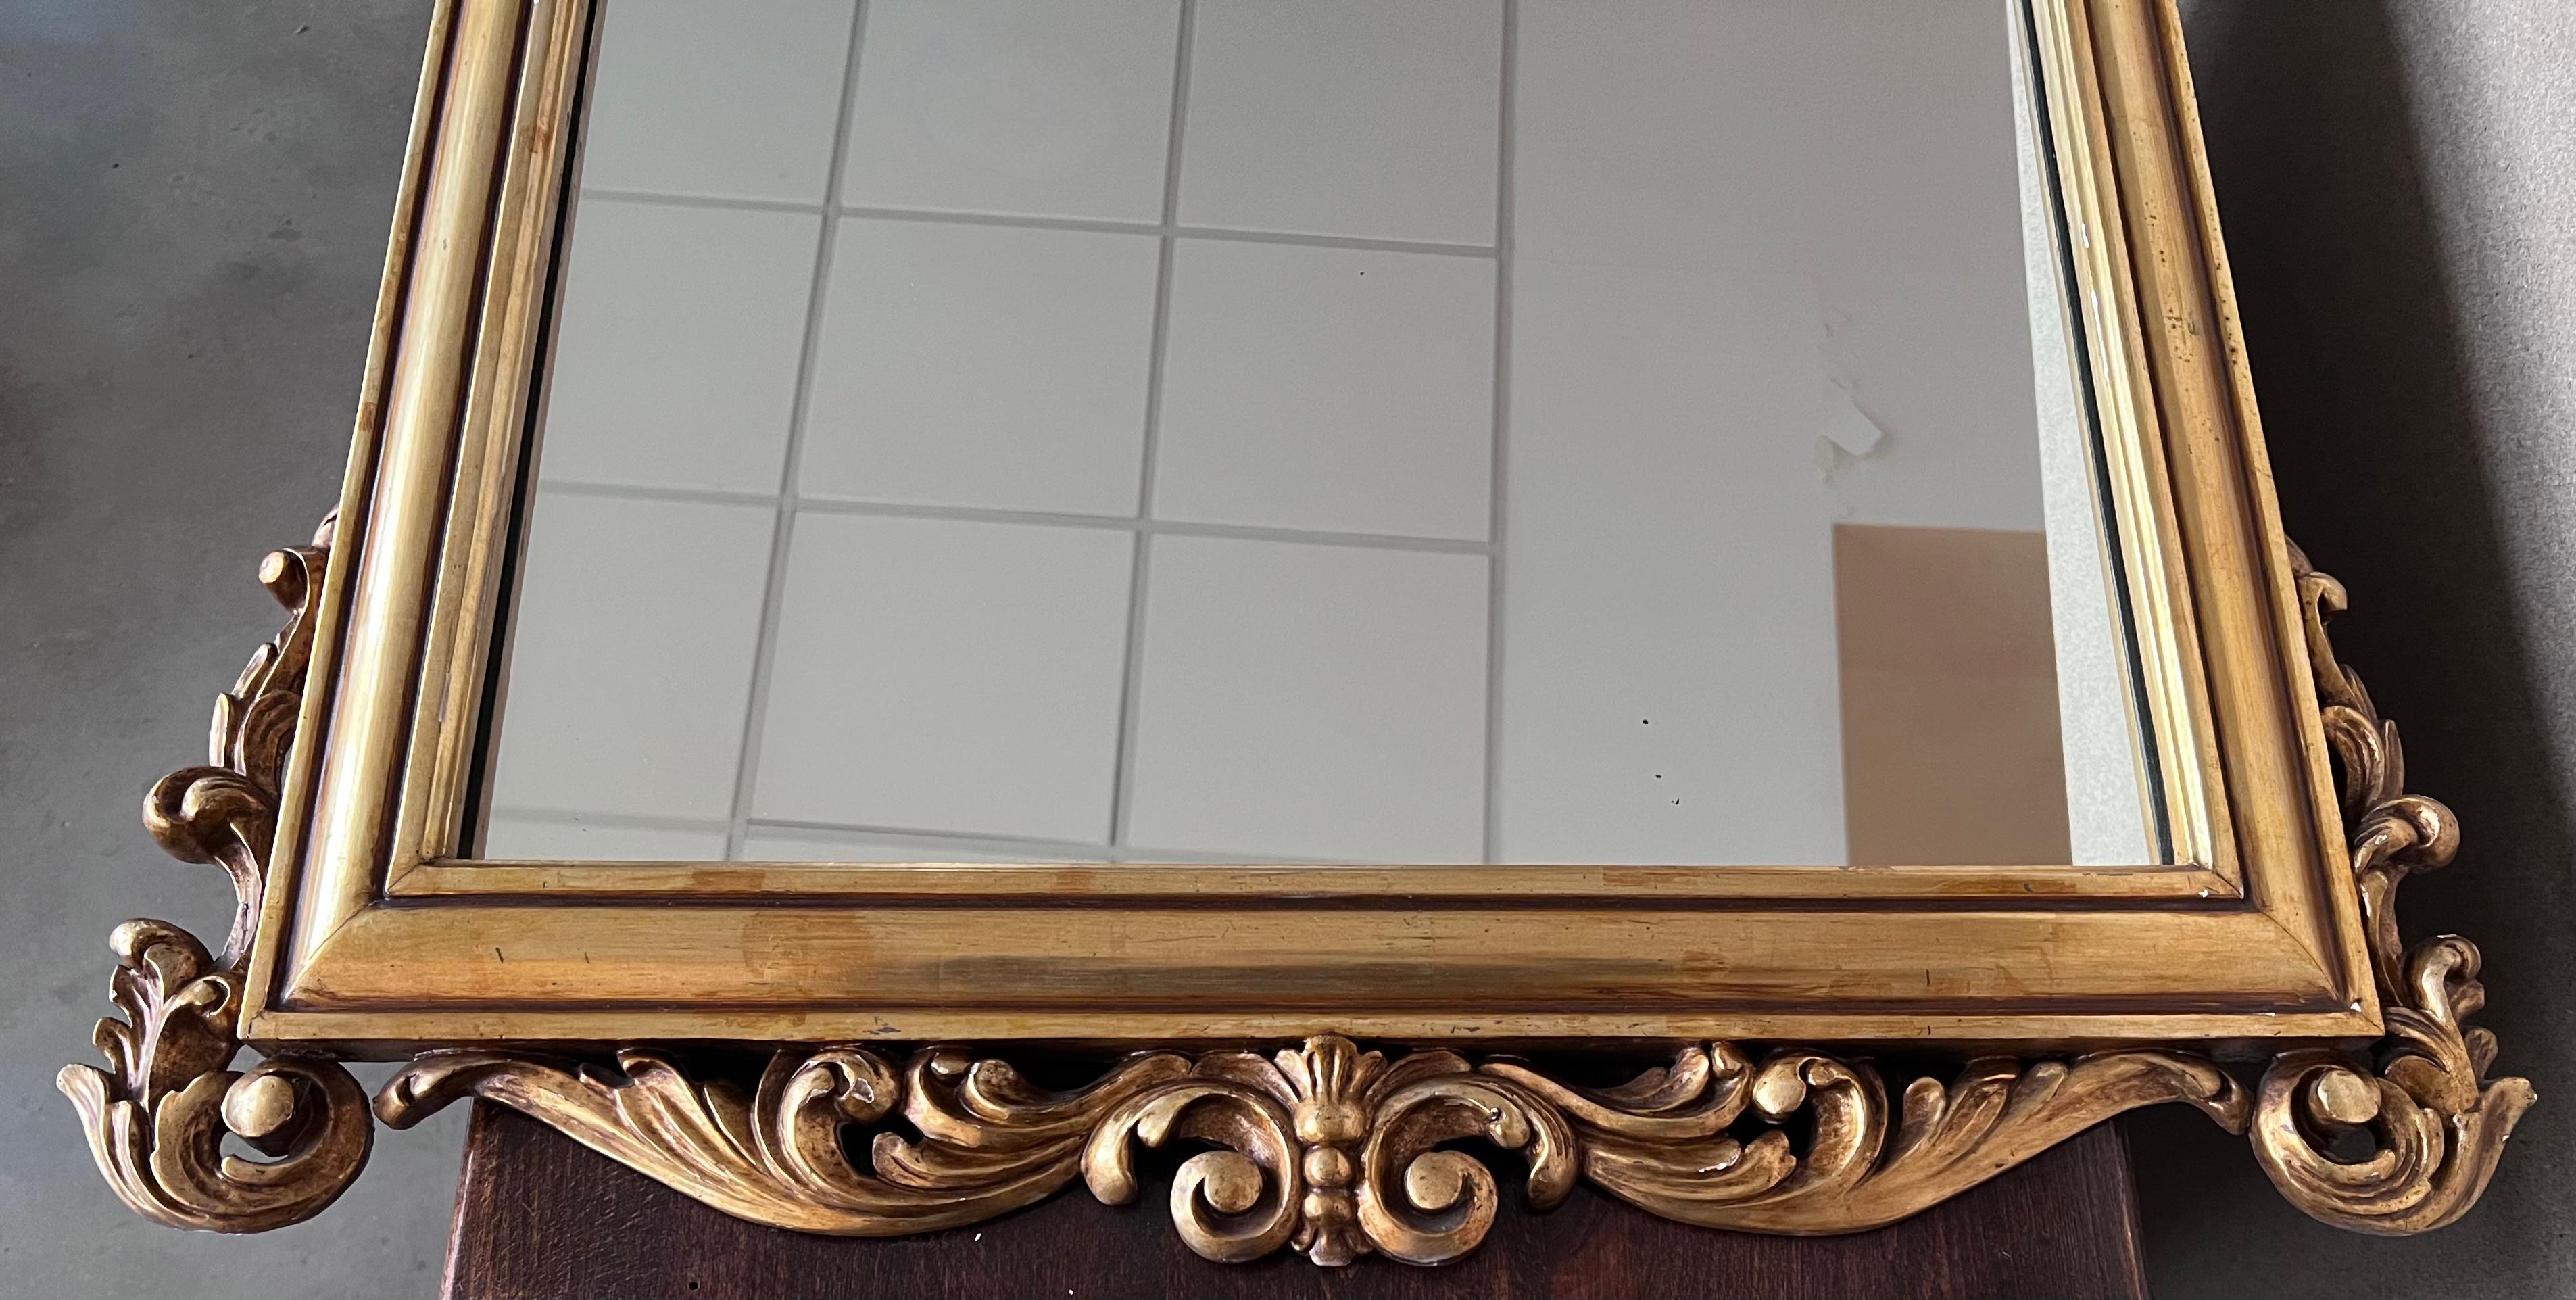 20th Century 20th French Empire Period Carved Gilt Wood Rectangular Mirror with Crest For Sale